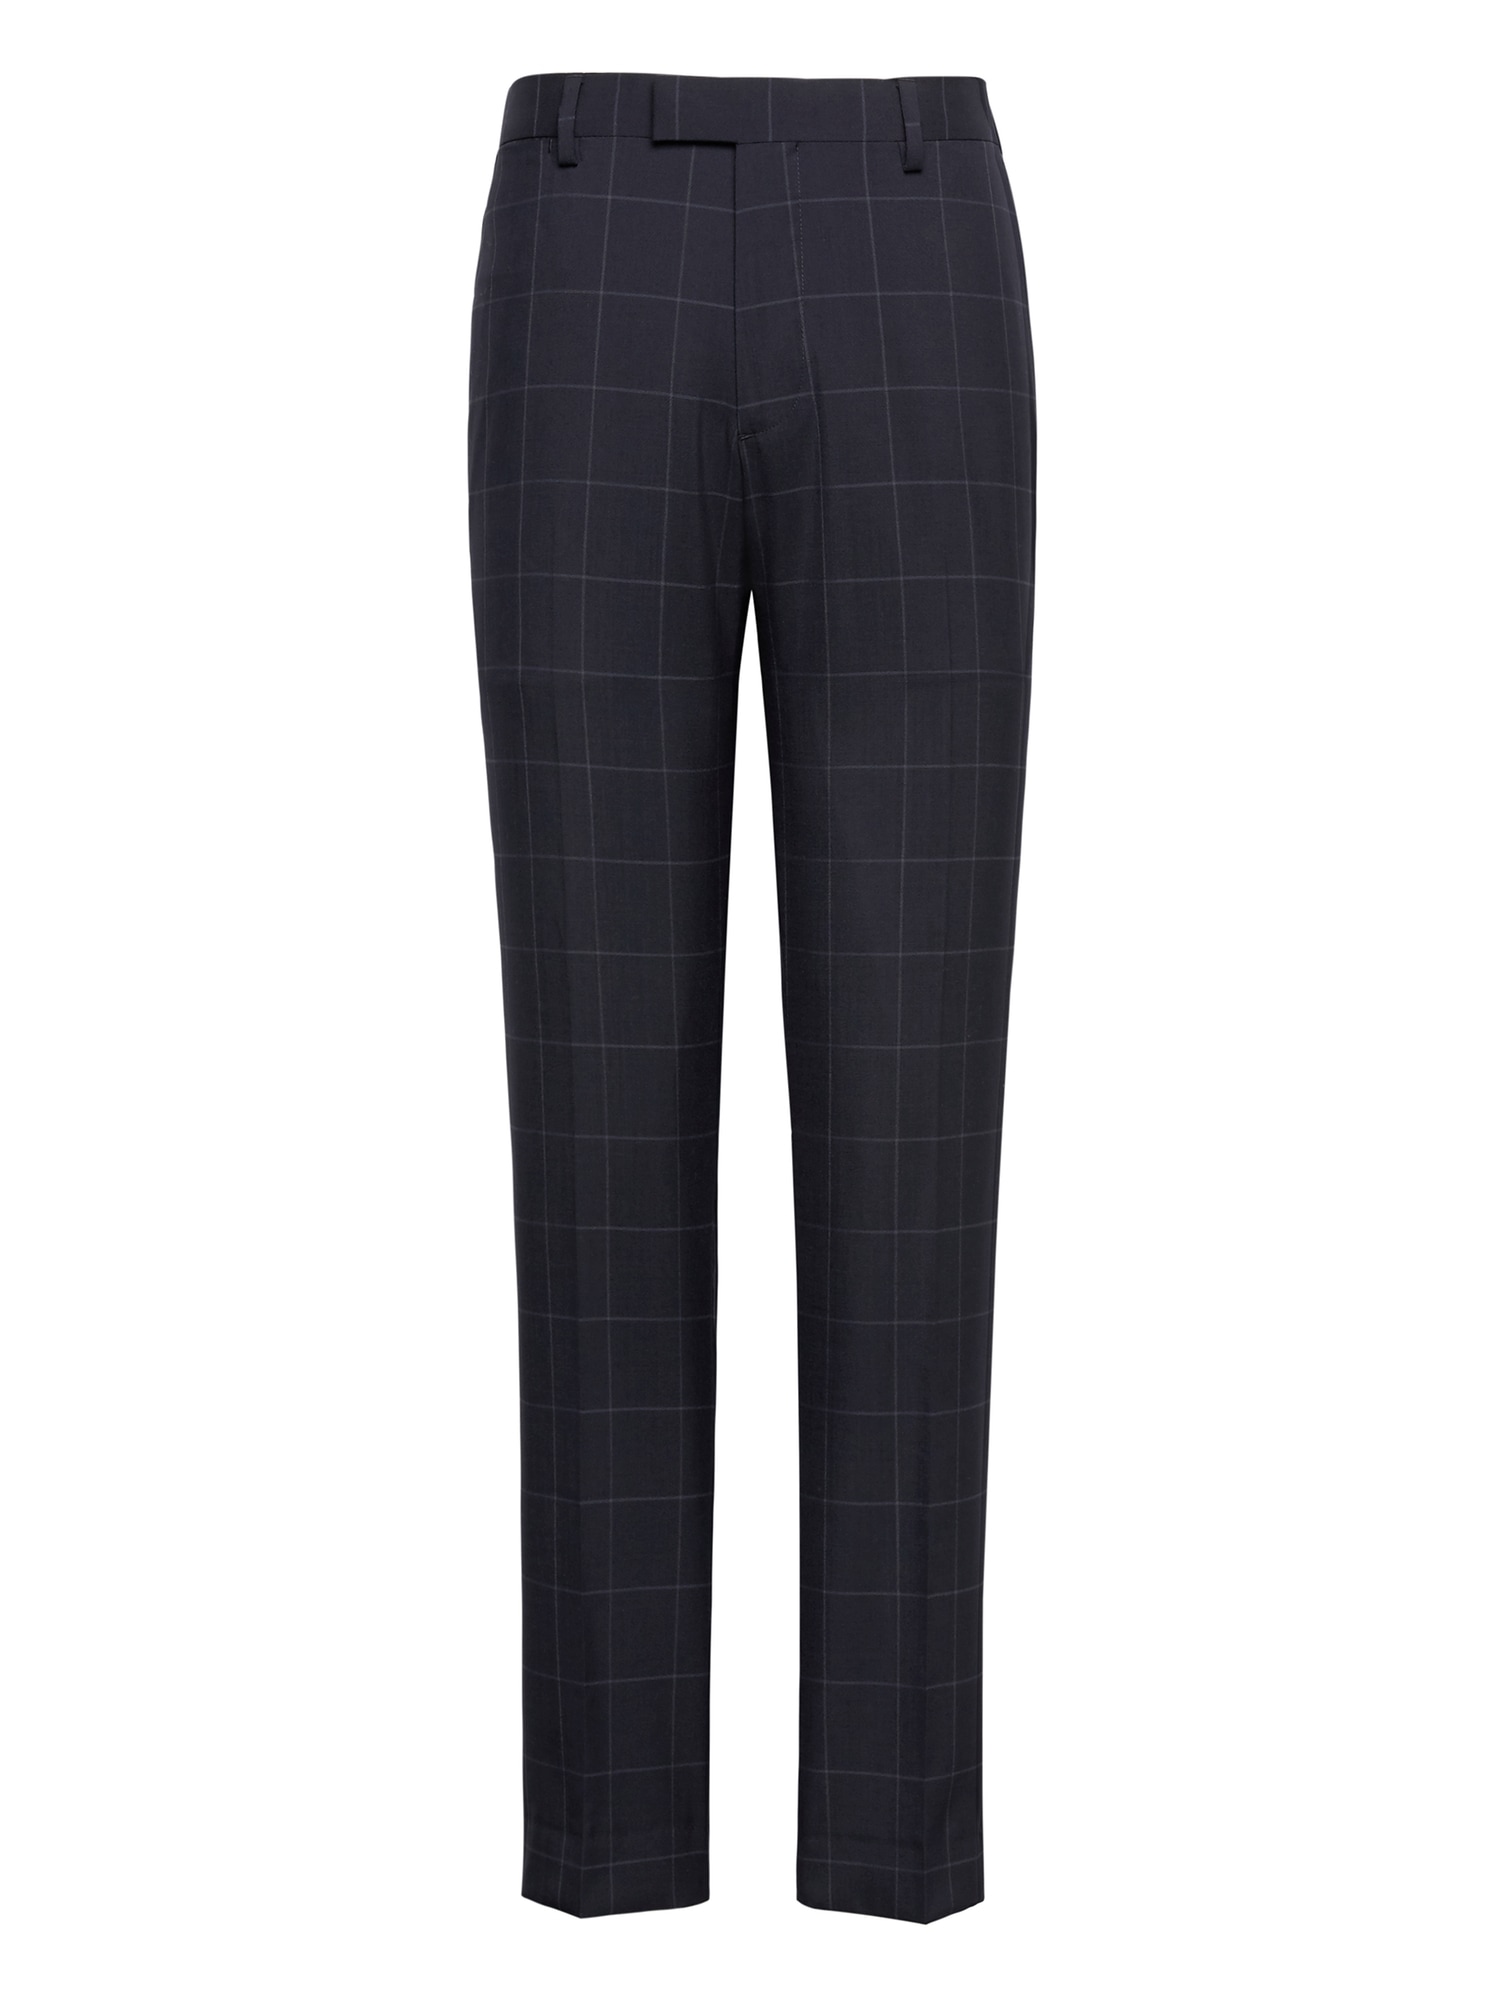 Tapered Navy Smart-Weight Performance Wool Blend Suit Pant